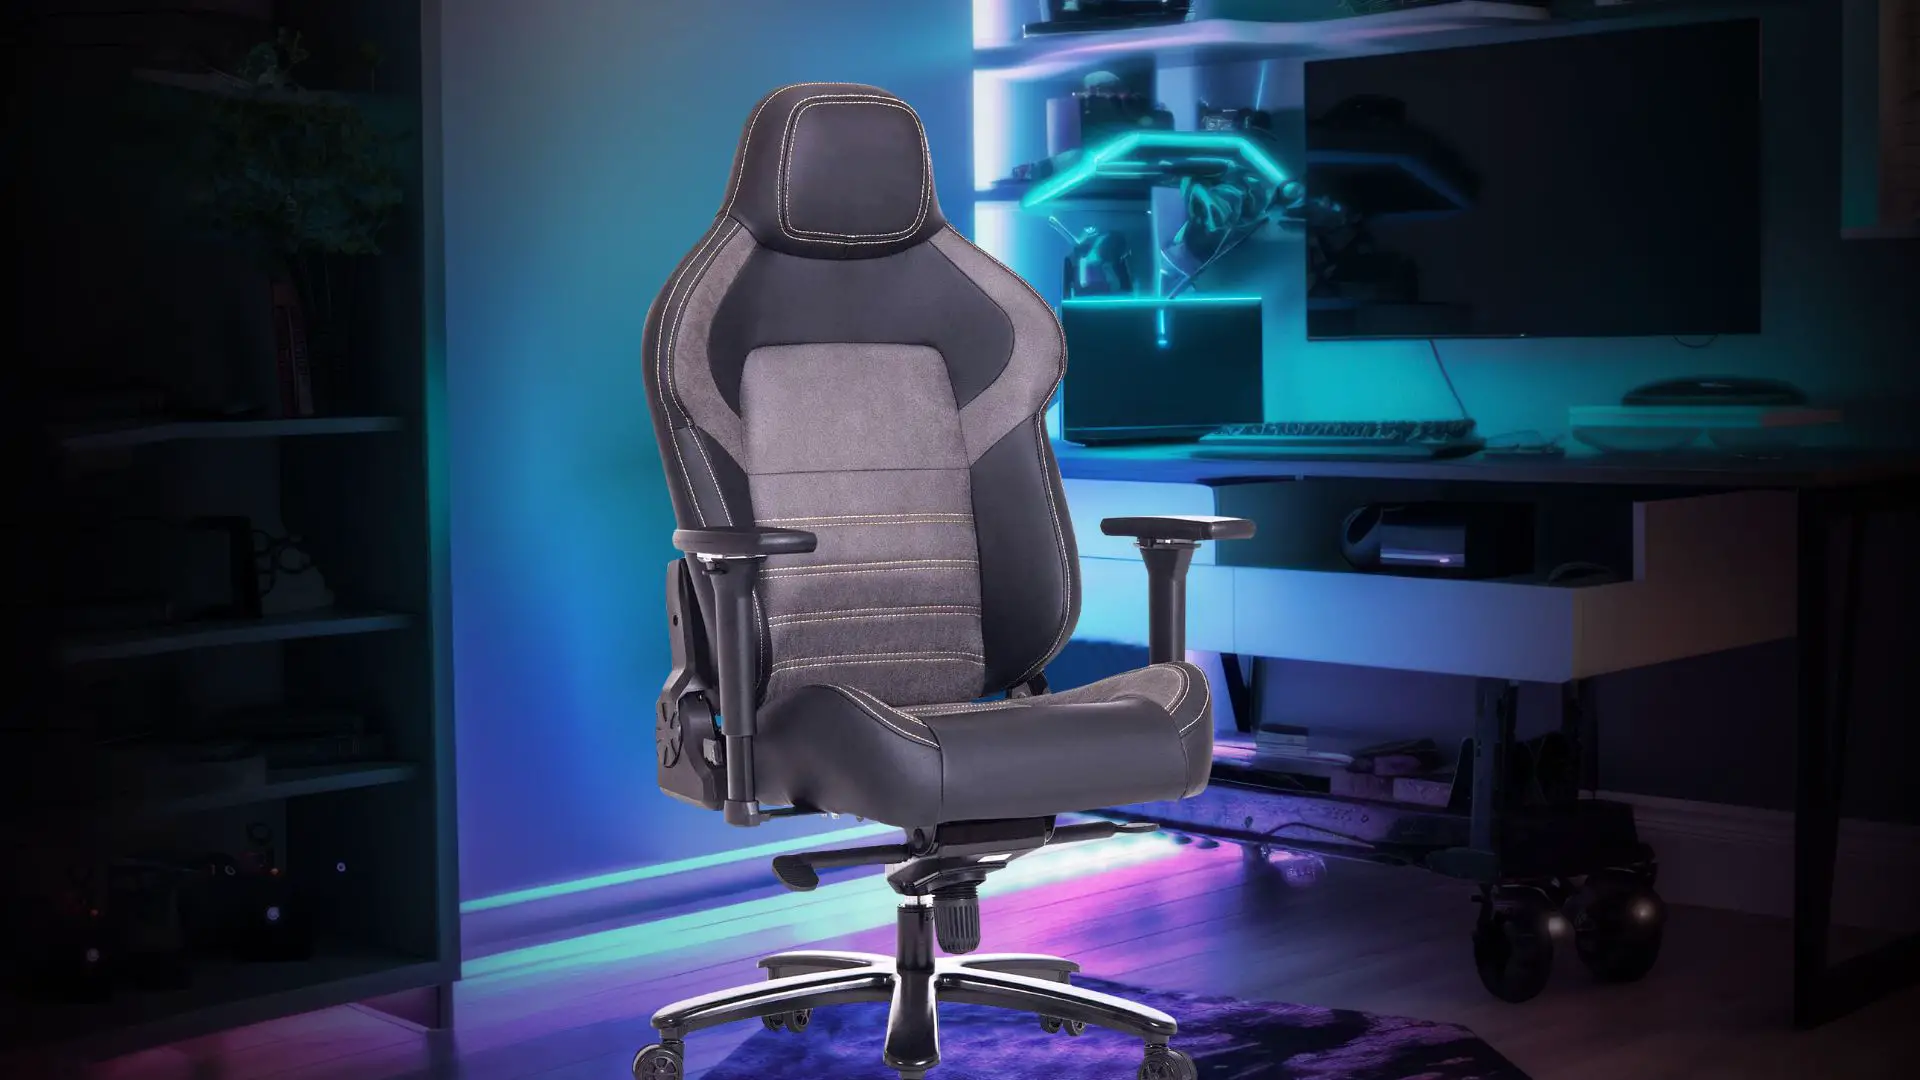 08 VON RACER Big and Tall Gaming Chair